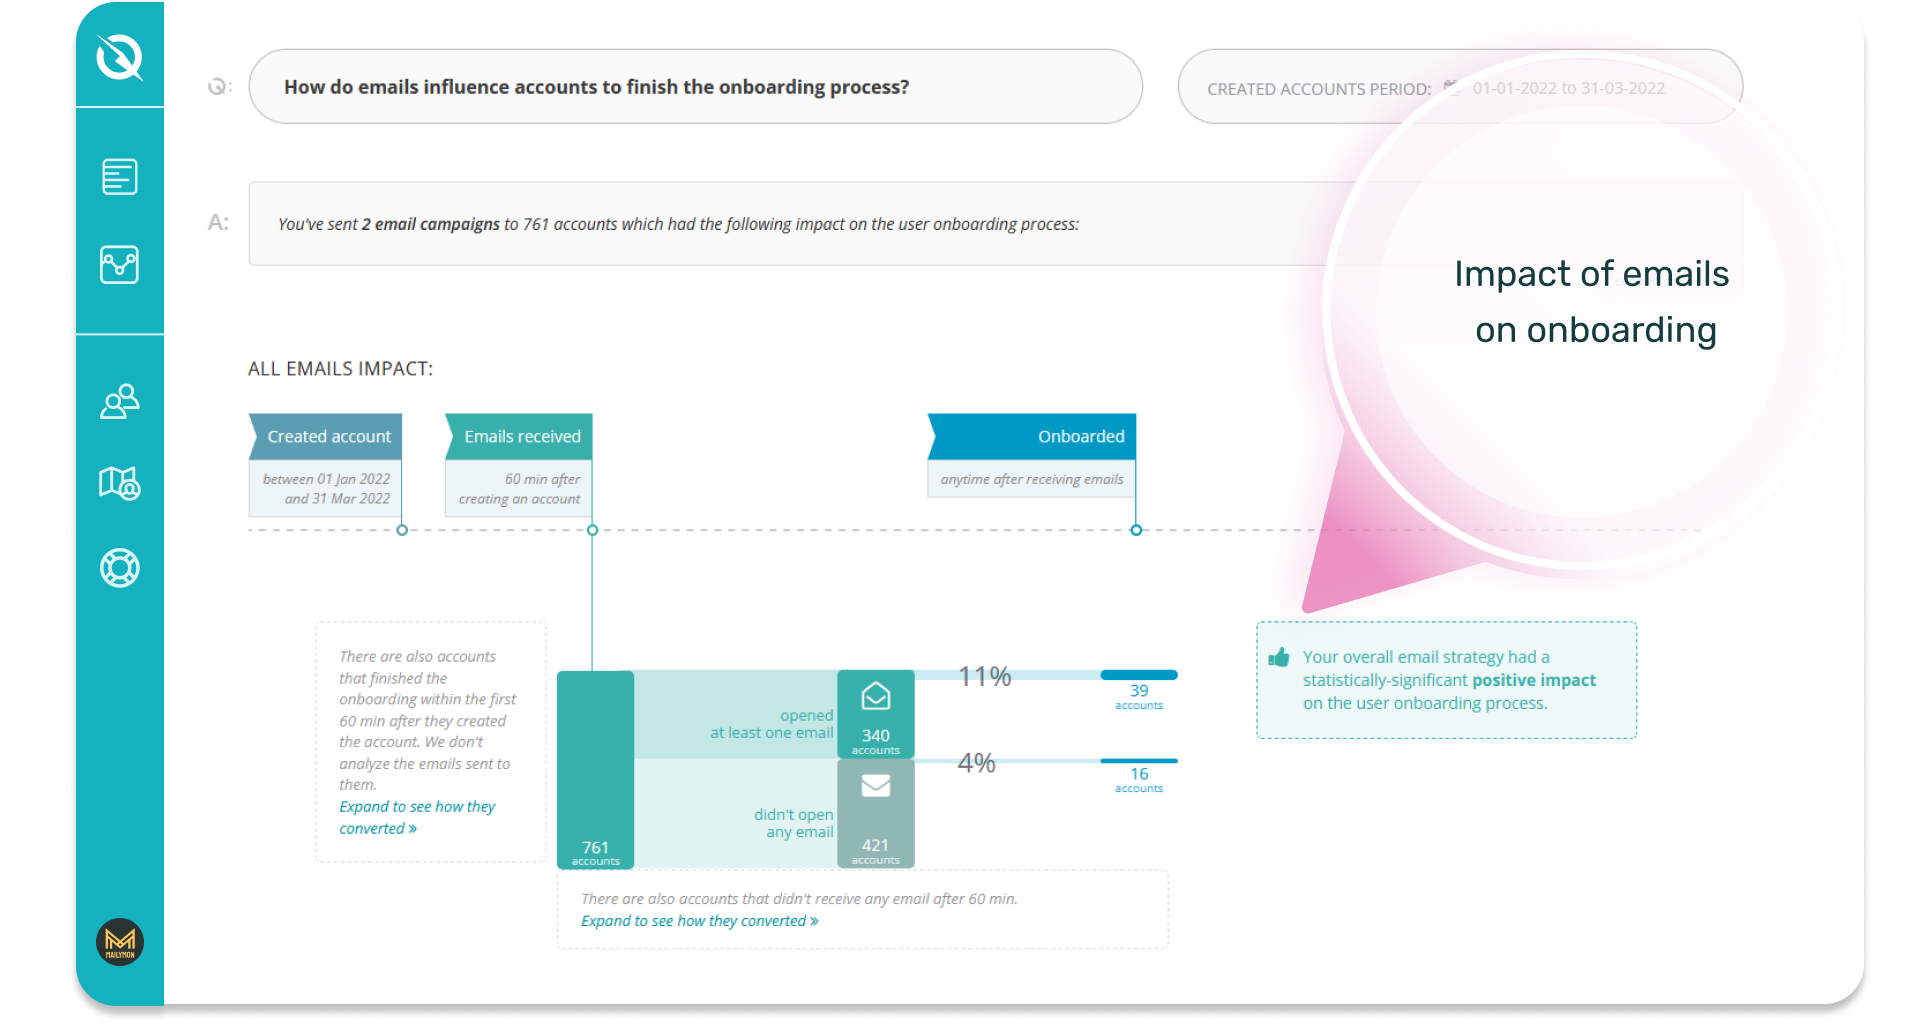 InnerTrends pre-built analytics report - Impact of emails on onboarding